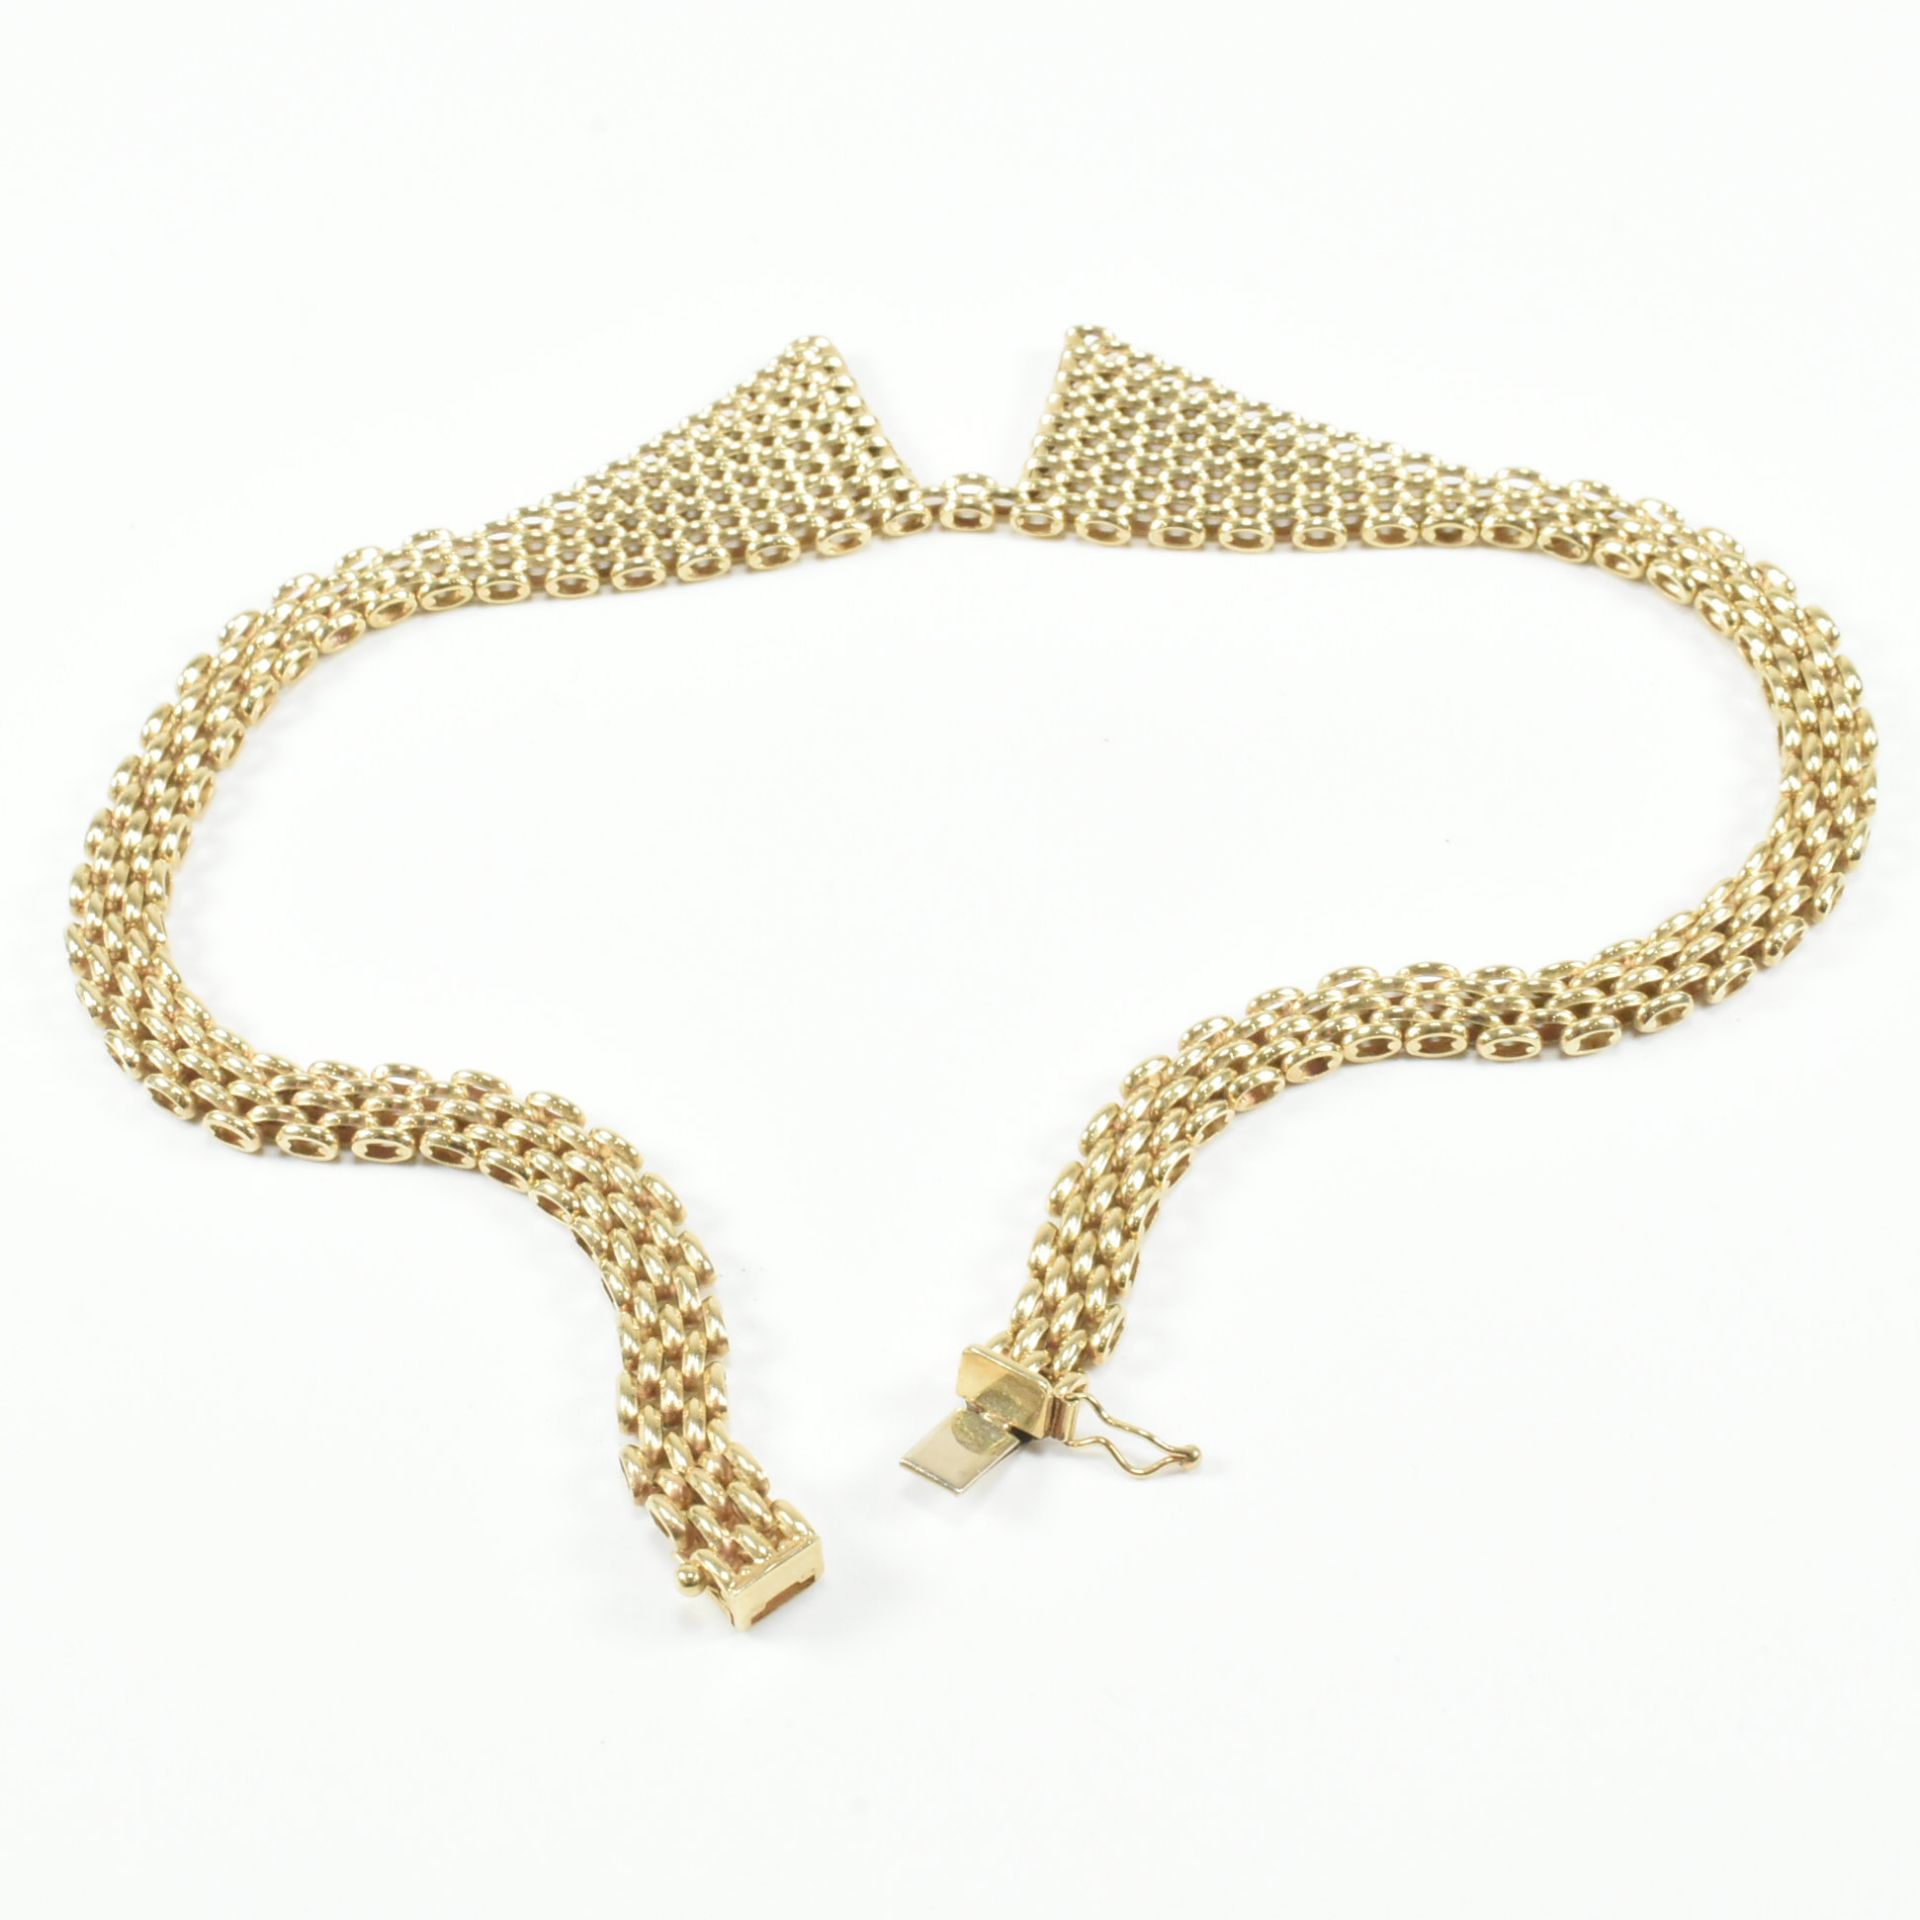 VINTAGE HALLMARKED 9CT GOLD NECKLACE CHAIN - Image 3 of 8